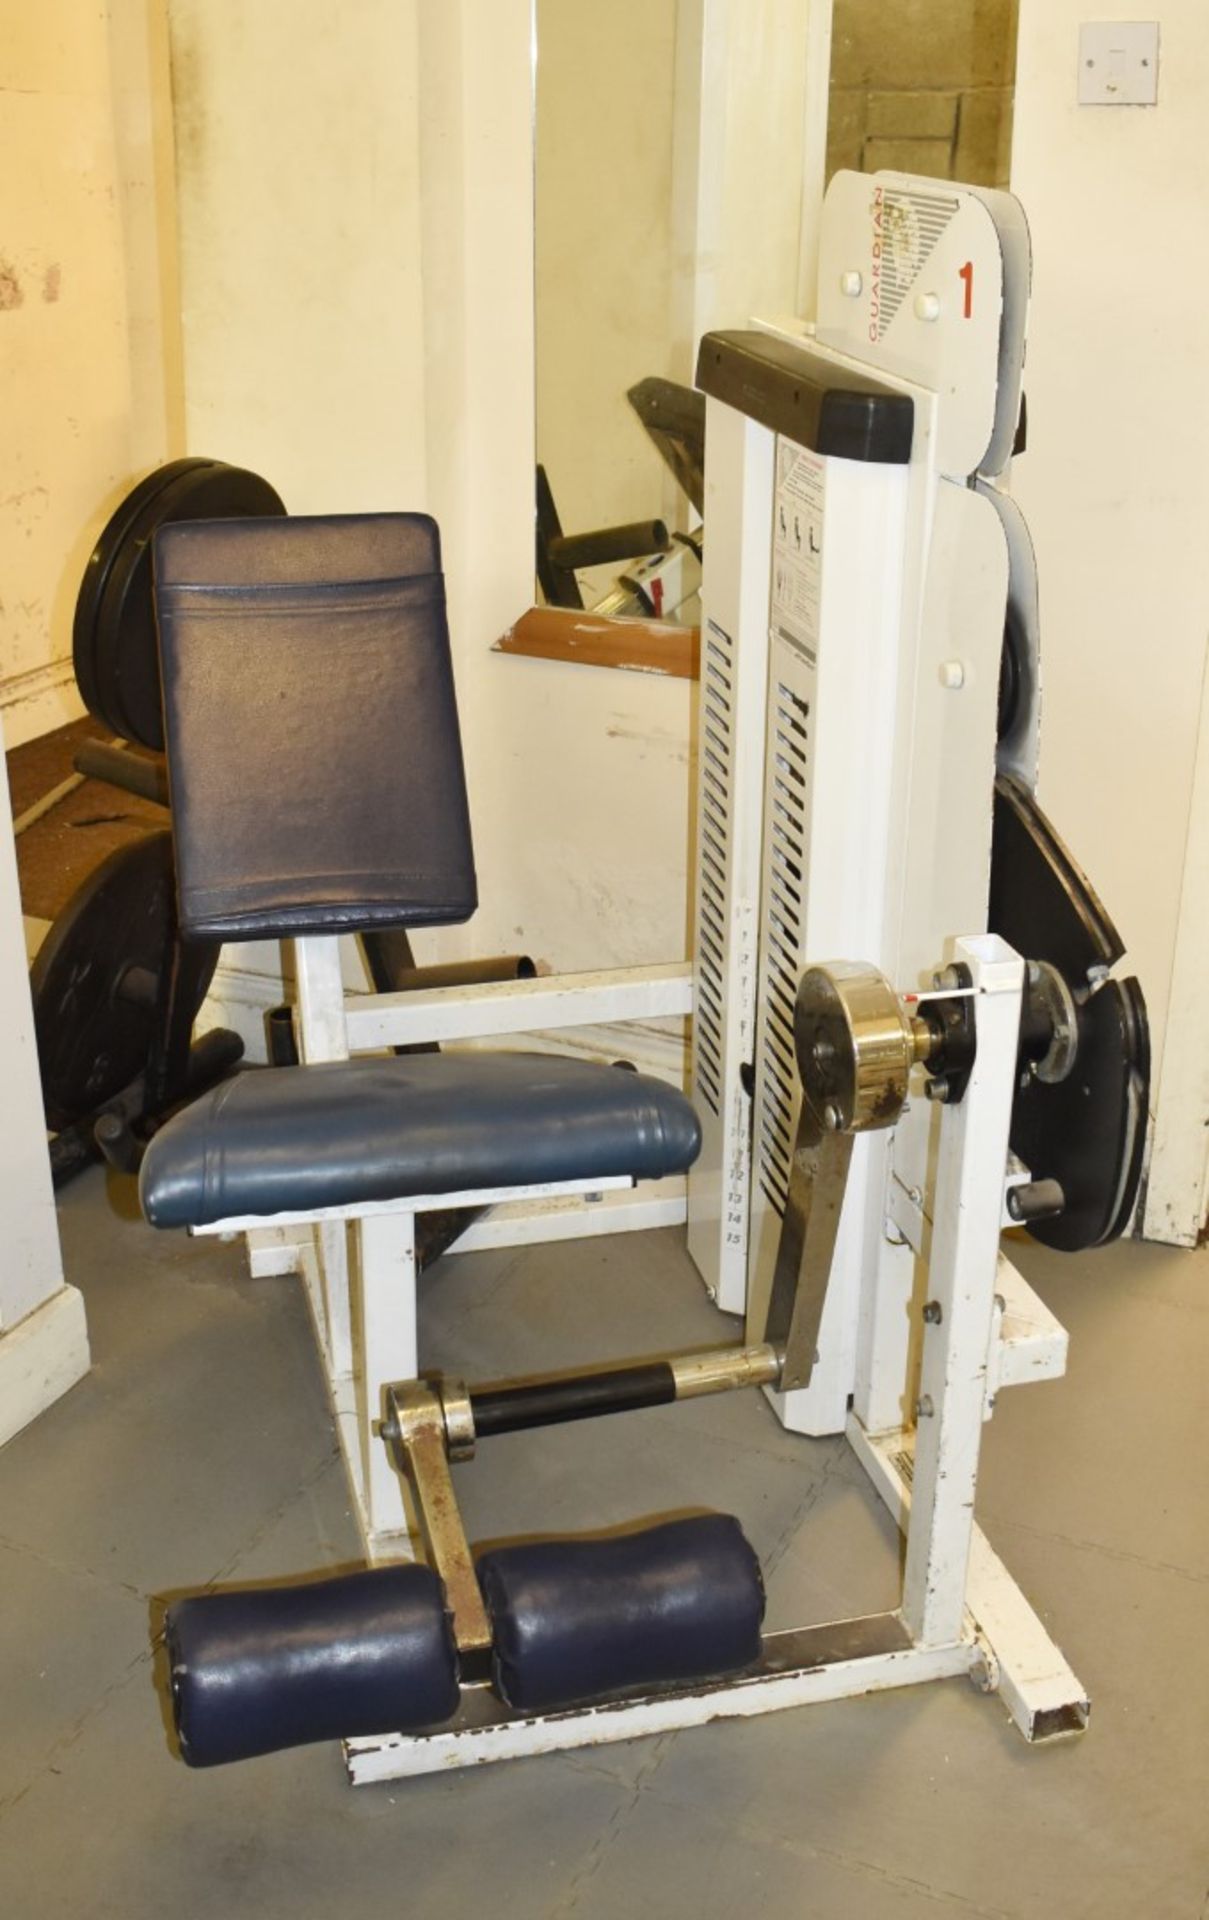 Contents of Bodybuilding and Strongman Gym - Includes Approx 30 Pieces of Gym Equipment, Floor Mats, - Image 35 of 95